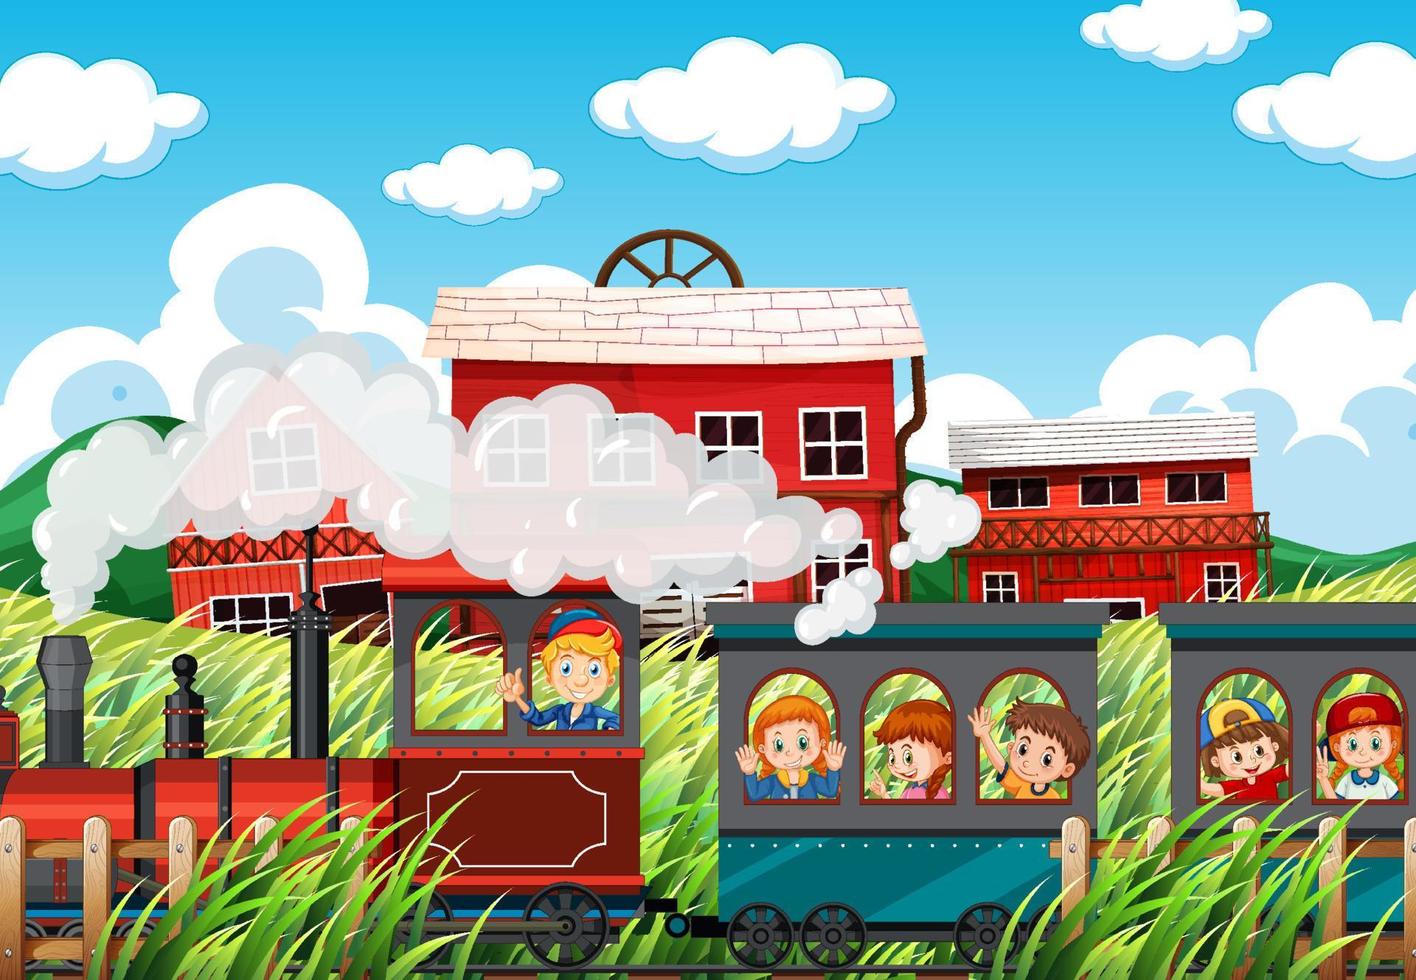 Train riding with children in countryside vector